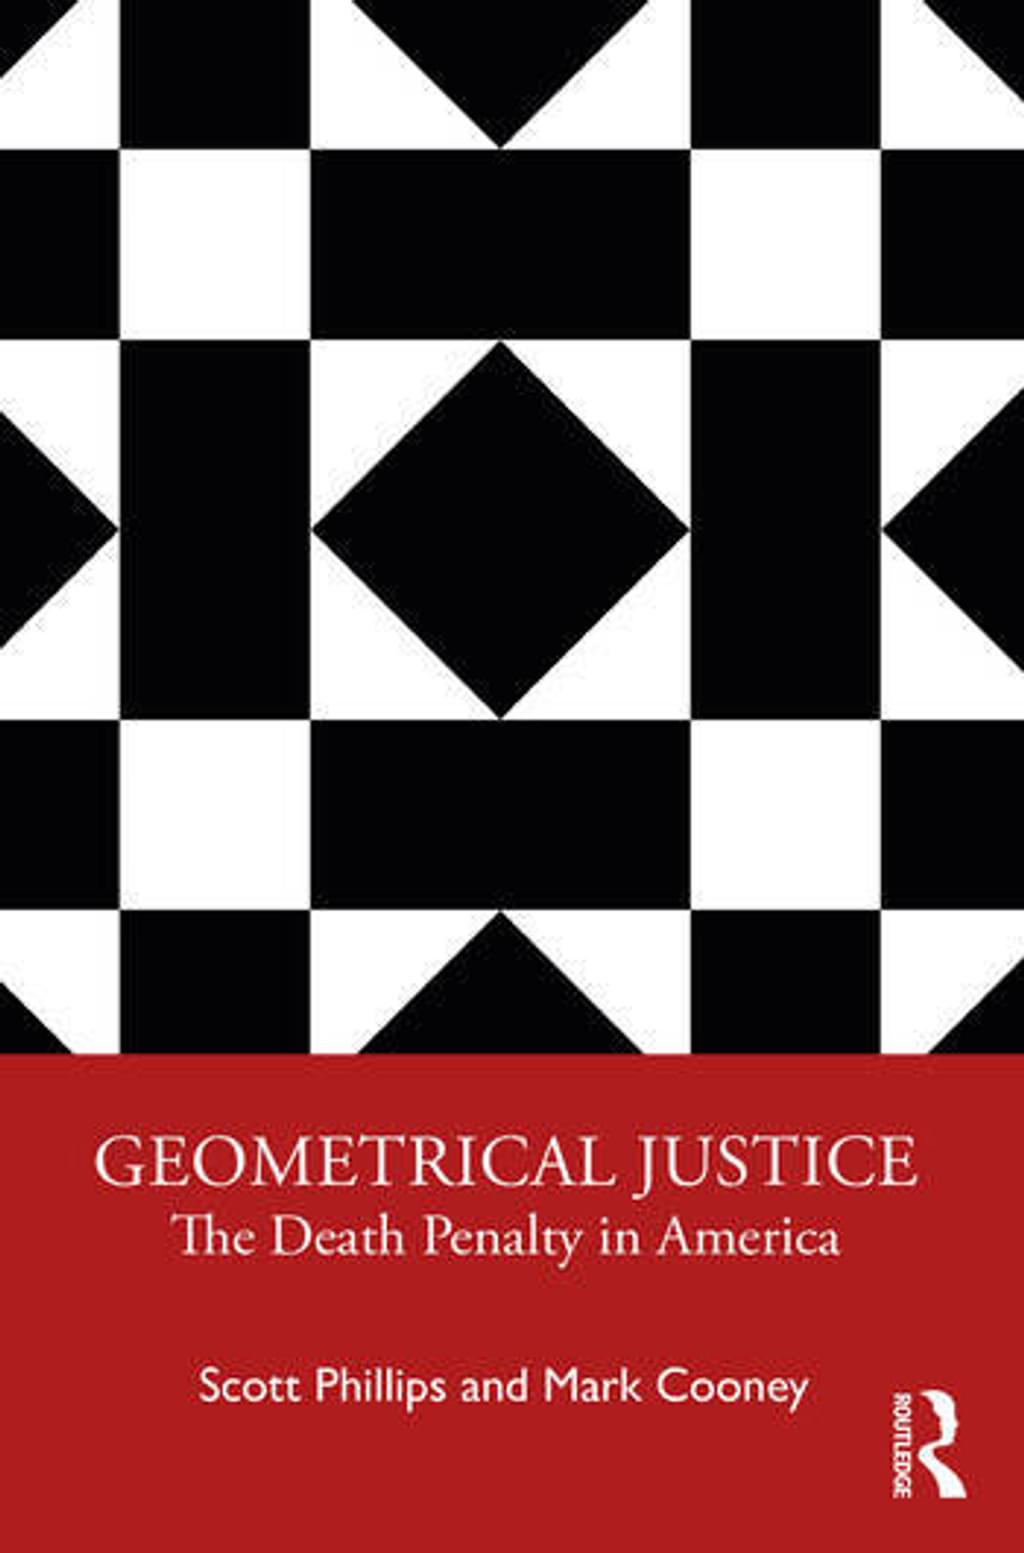 BOOKS:  “Geometrical Justice: The Death Penalty in America”